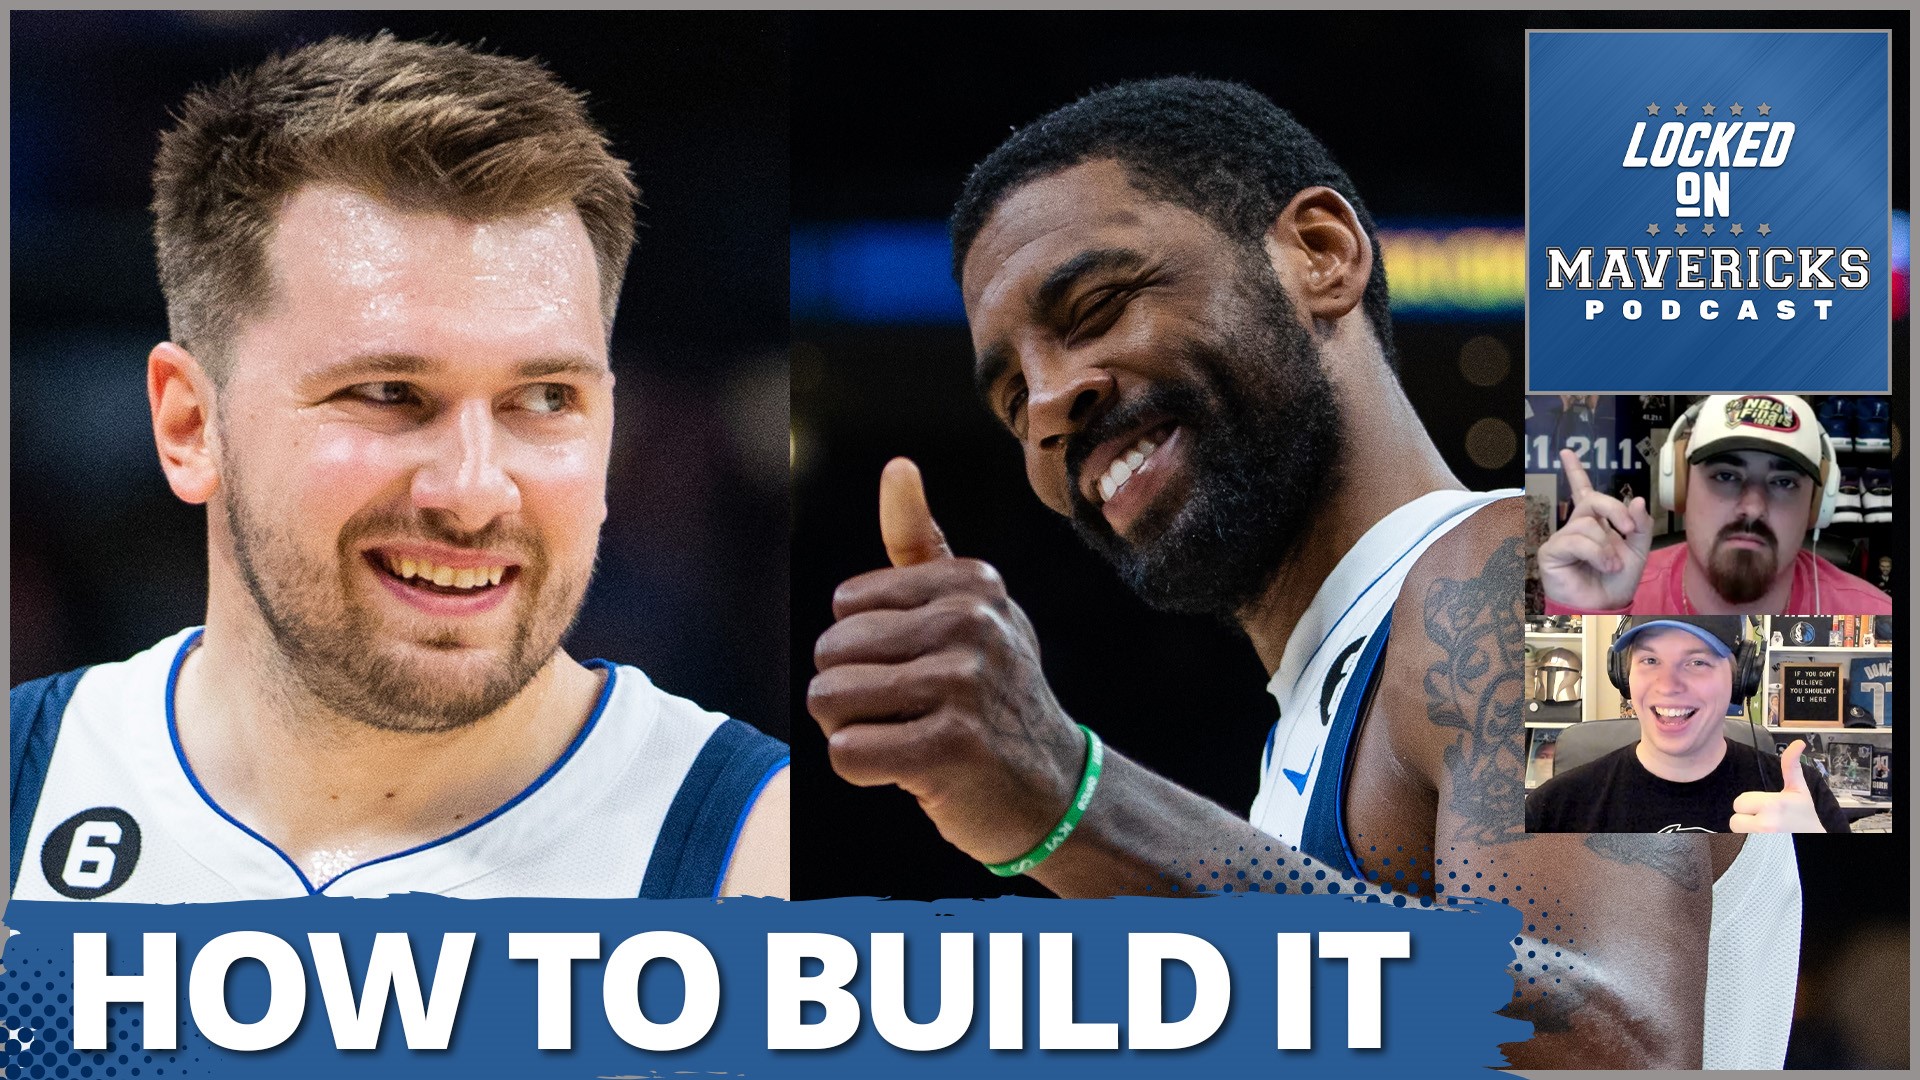 Nick Angstadt & Isaac Harris answer your questions about building around Luka Doncic through the NBA Draft, Mavs Trades, and more.